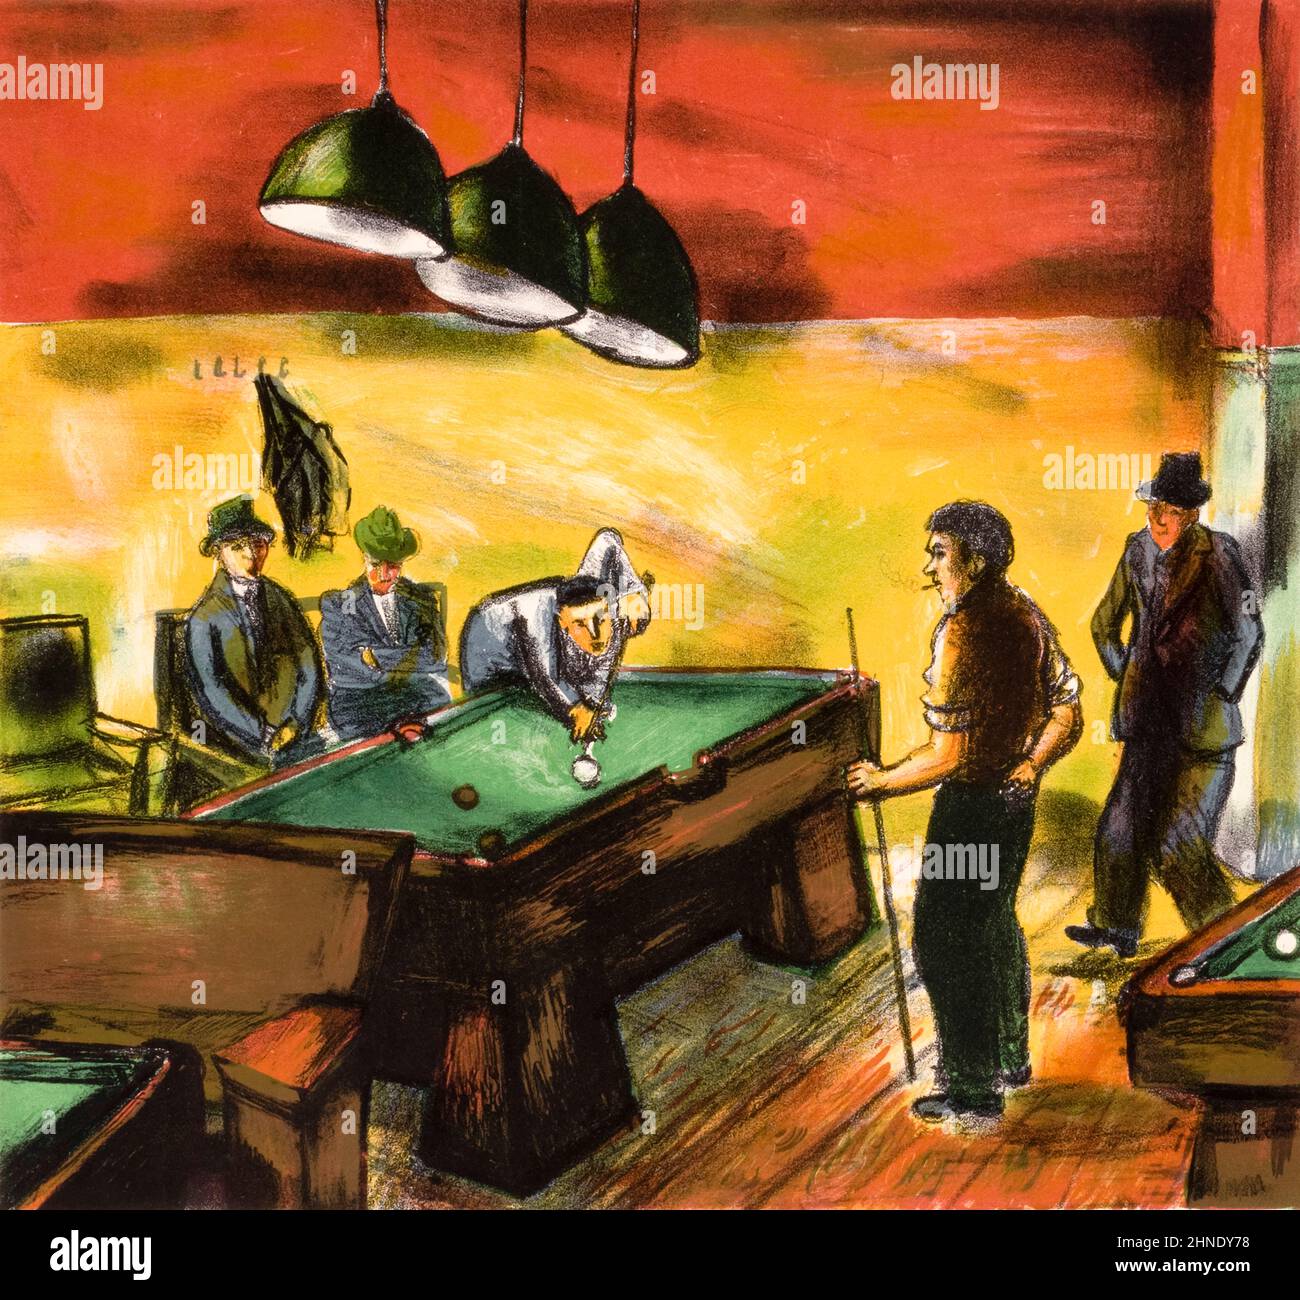 1930s America, Men playing Pool or Billiards, New Deal art, lithographic print, 1933-1943 - unidentified artist Stock Photo